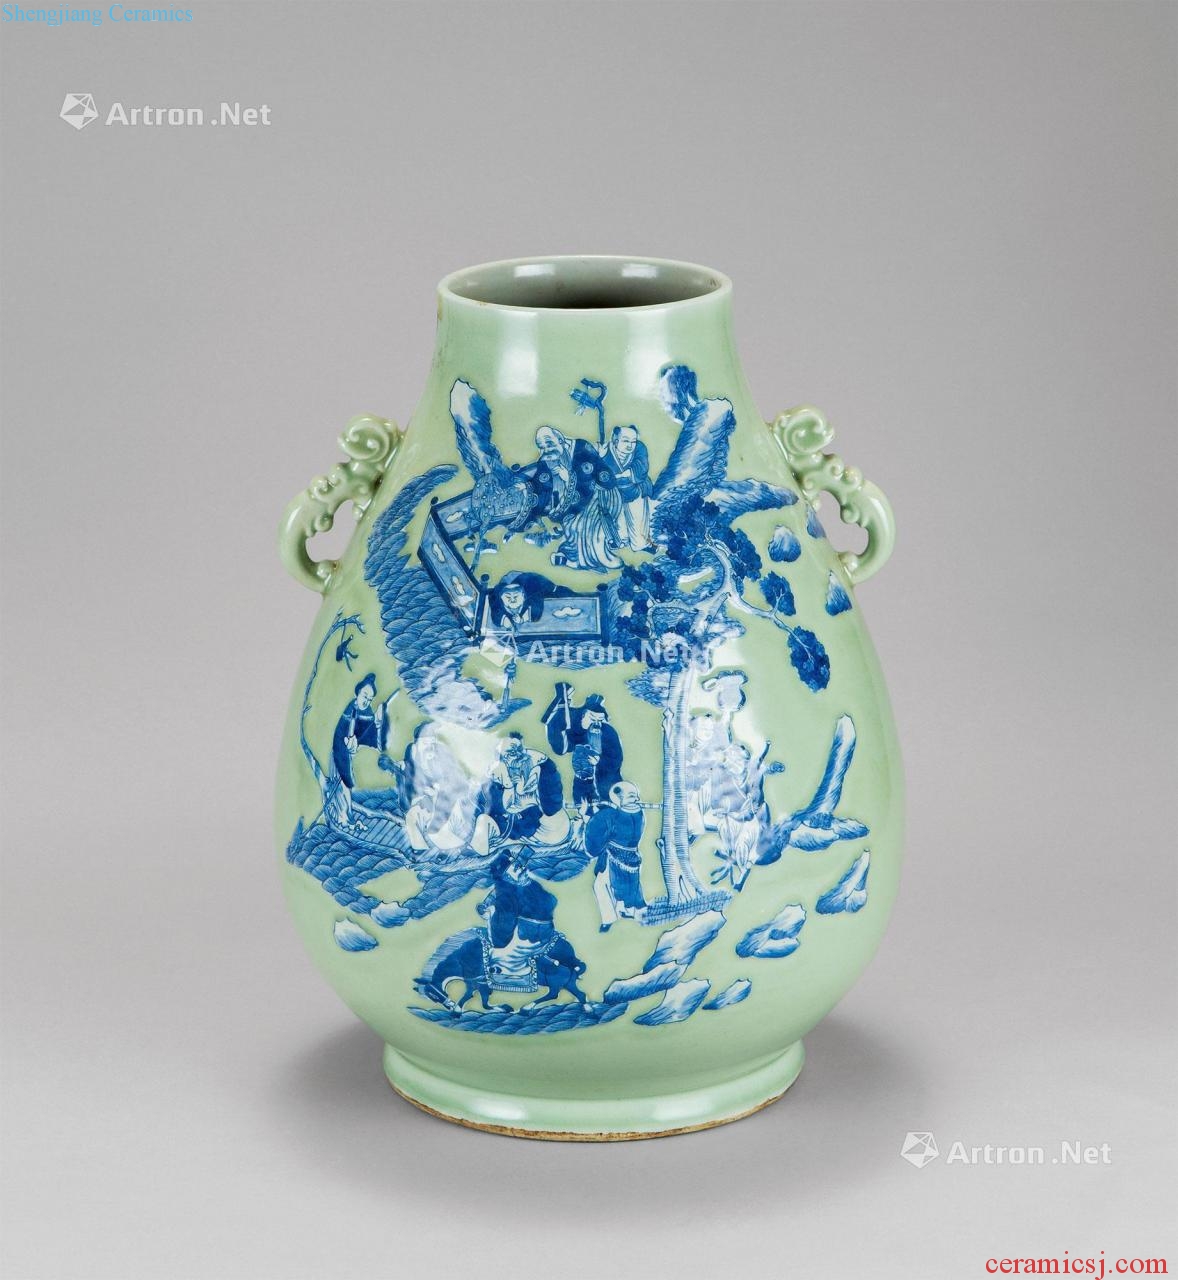 In the qing dynasty Pea green glaze porcelain of the eight immortals characters grain ears